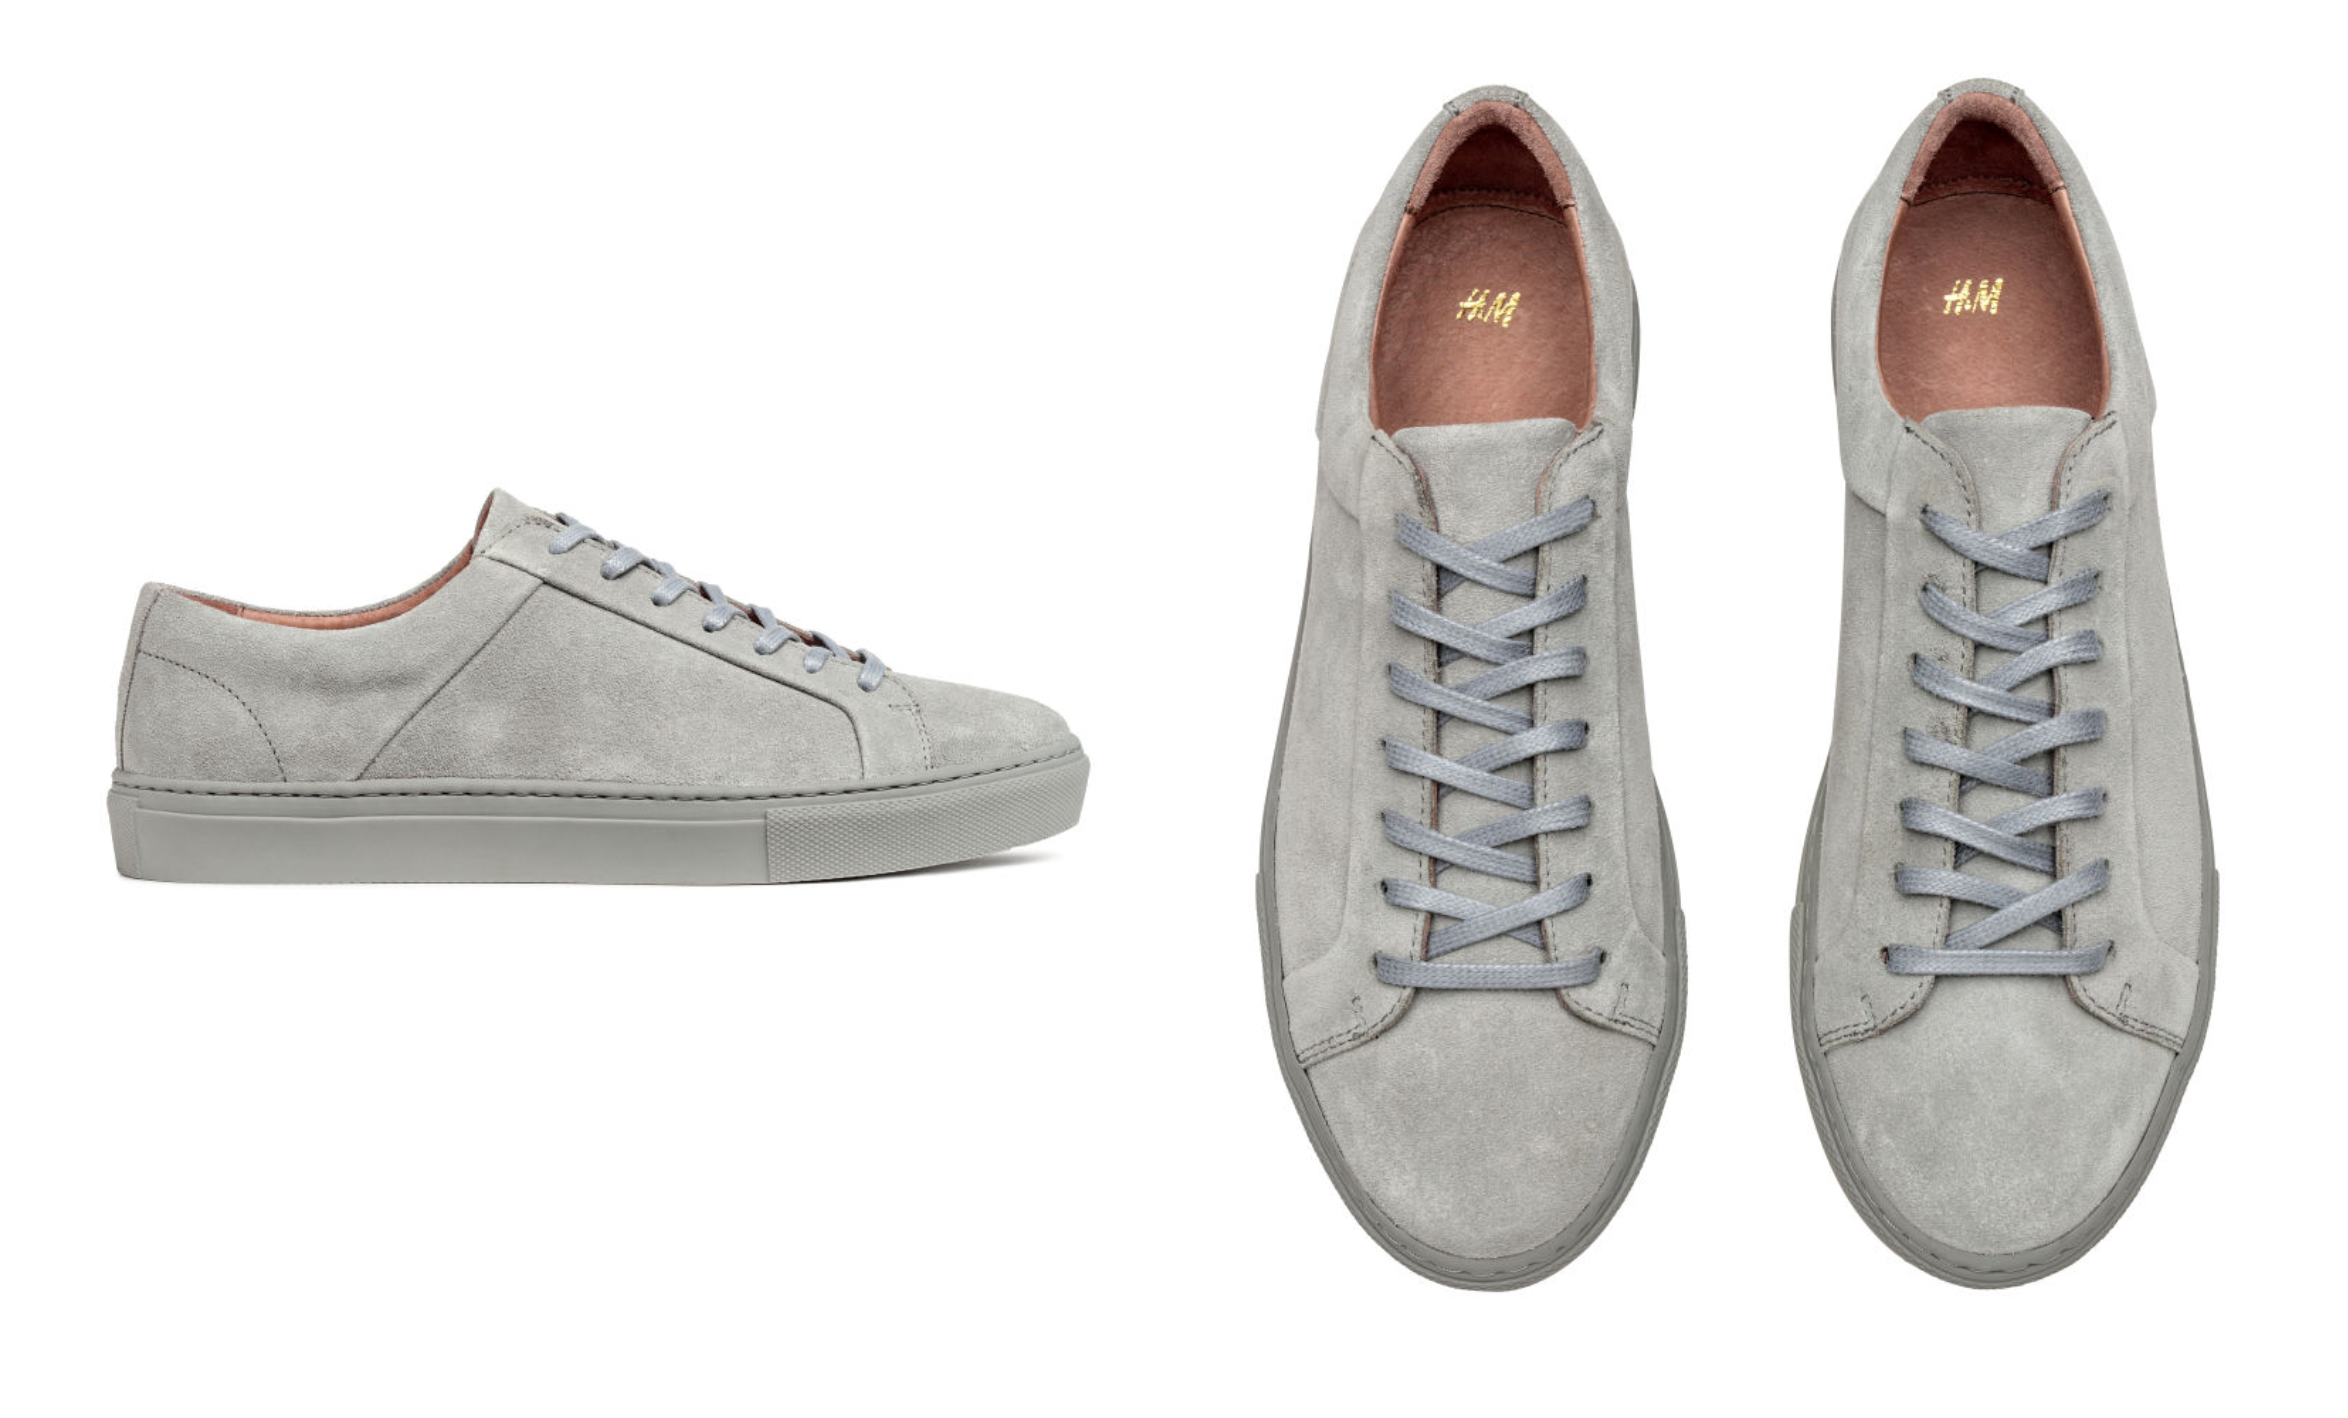 Geology Competitive dentist H&M's "Premium" Suede Sneakers In Review: Are They Worth Your Money? — The  Peak Lapel